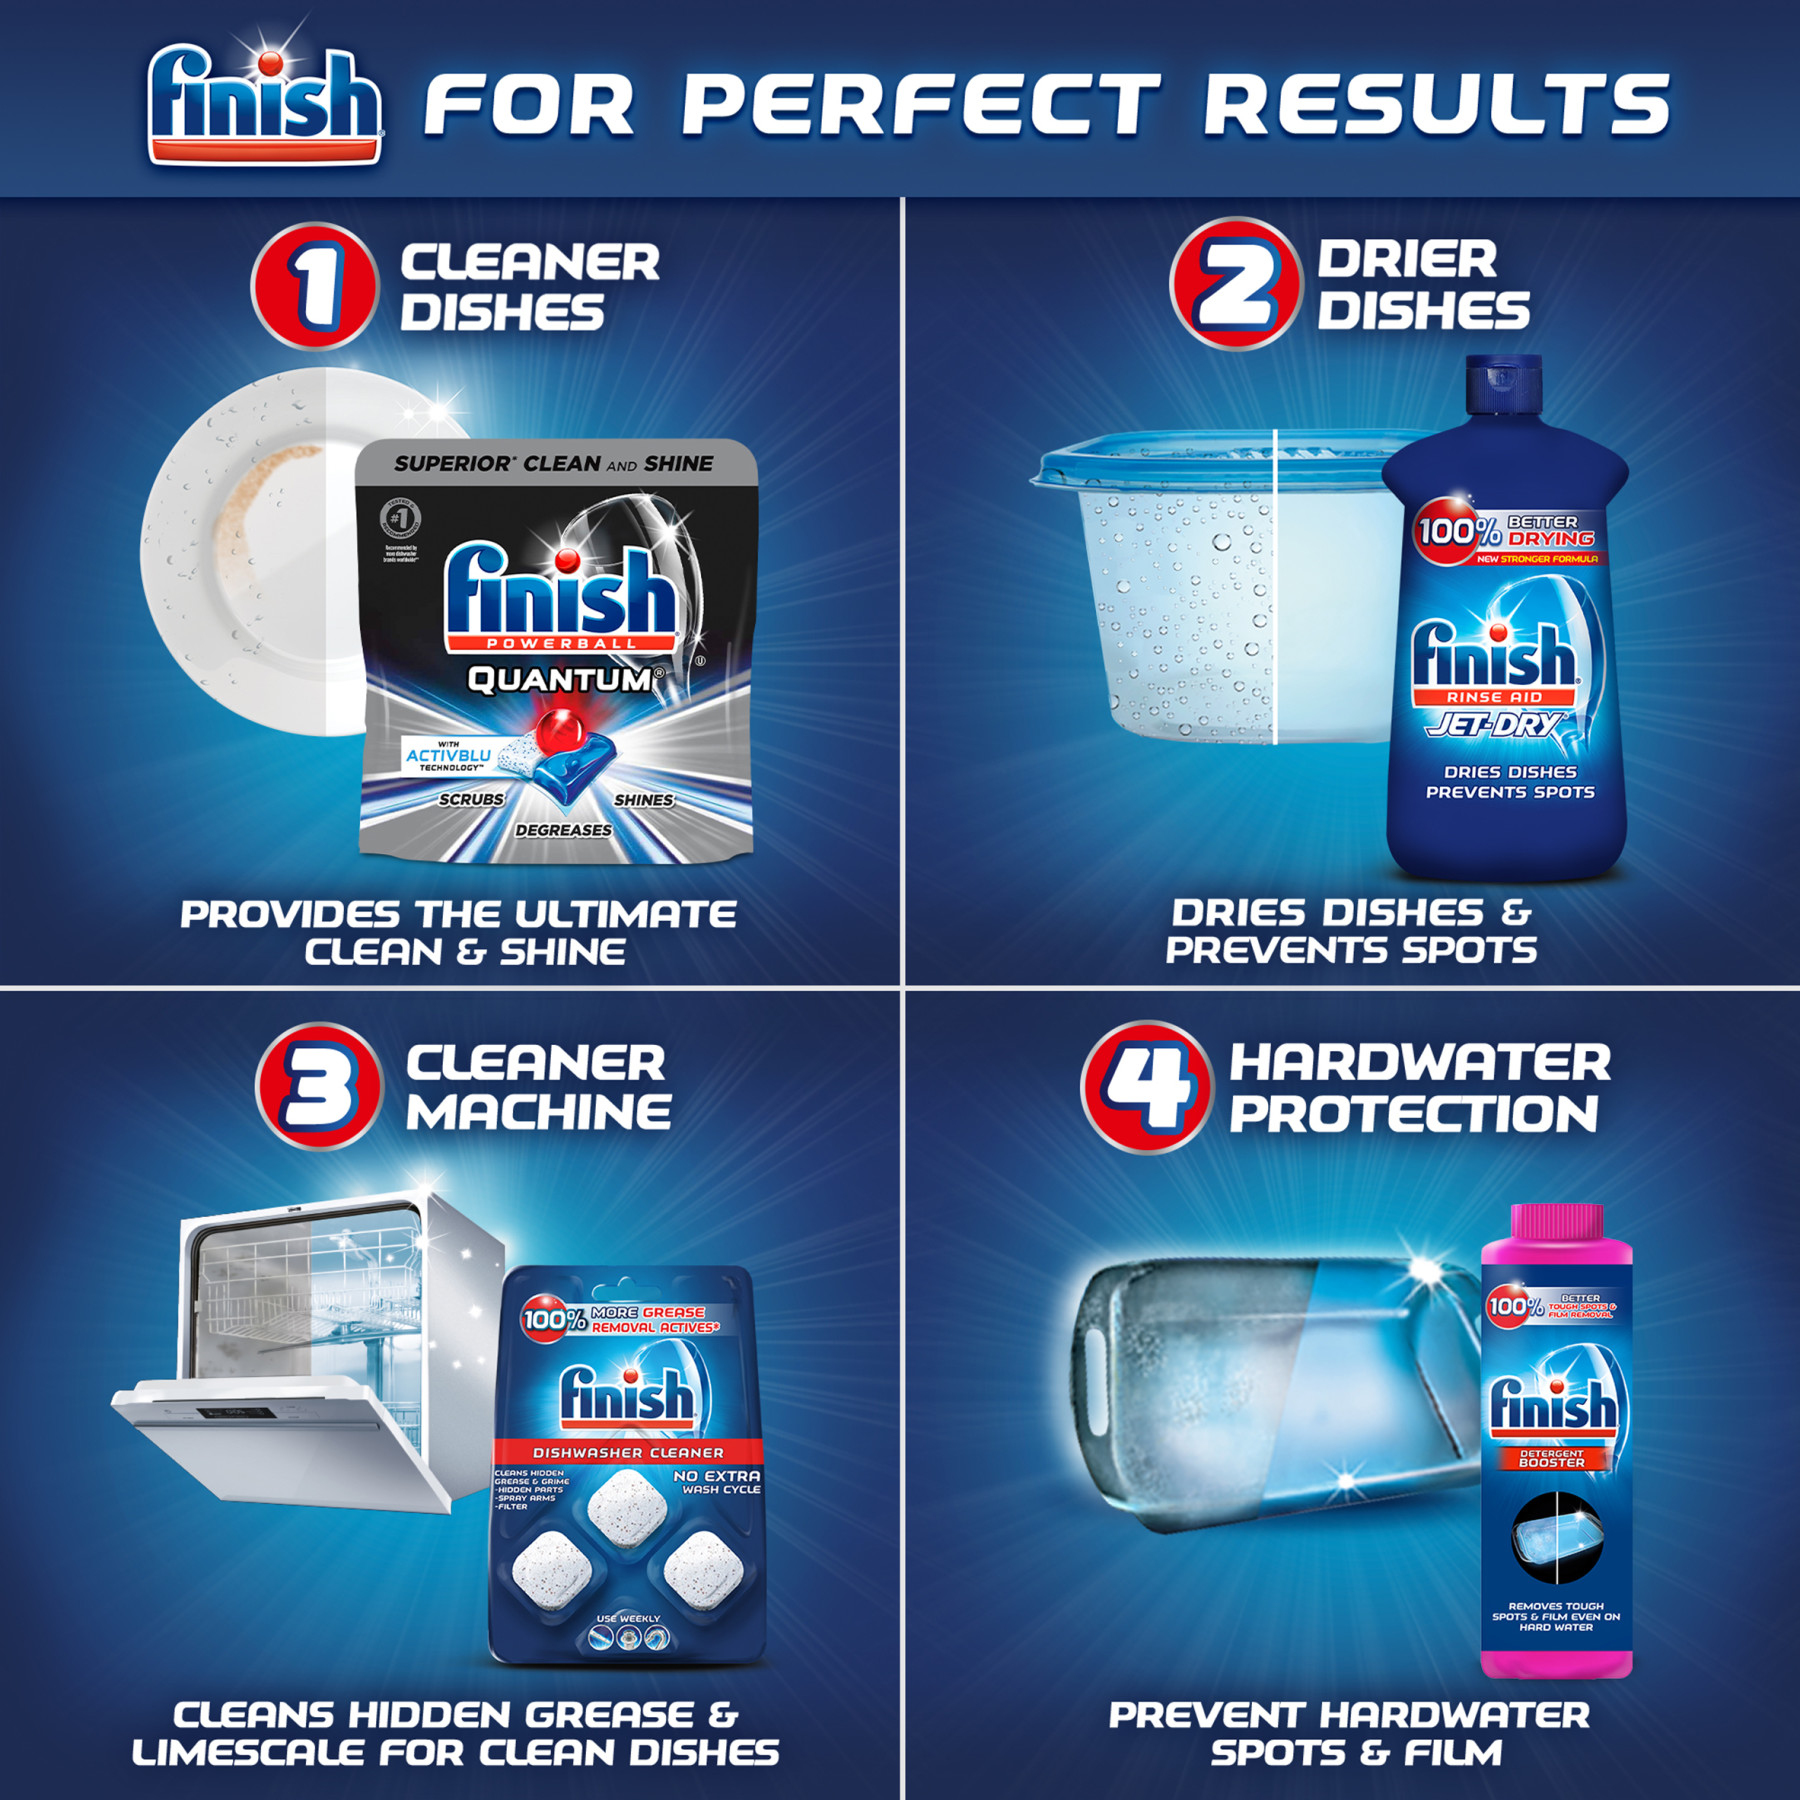 Finish Gelpacs 84ct, Fast Action, Deep Clean, Orange Scent, Dishwasher Detergent Tablets - image 3 of 13